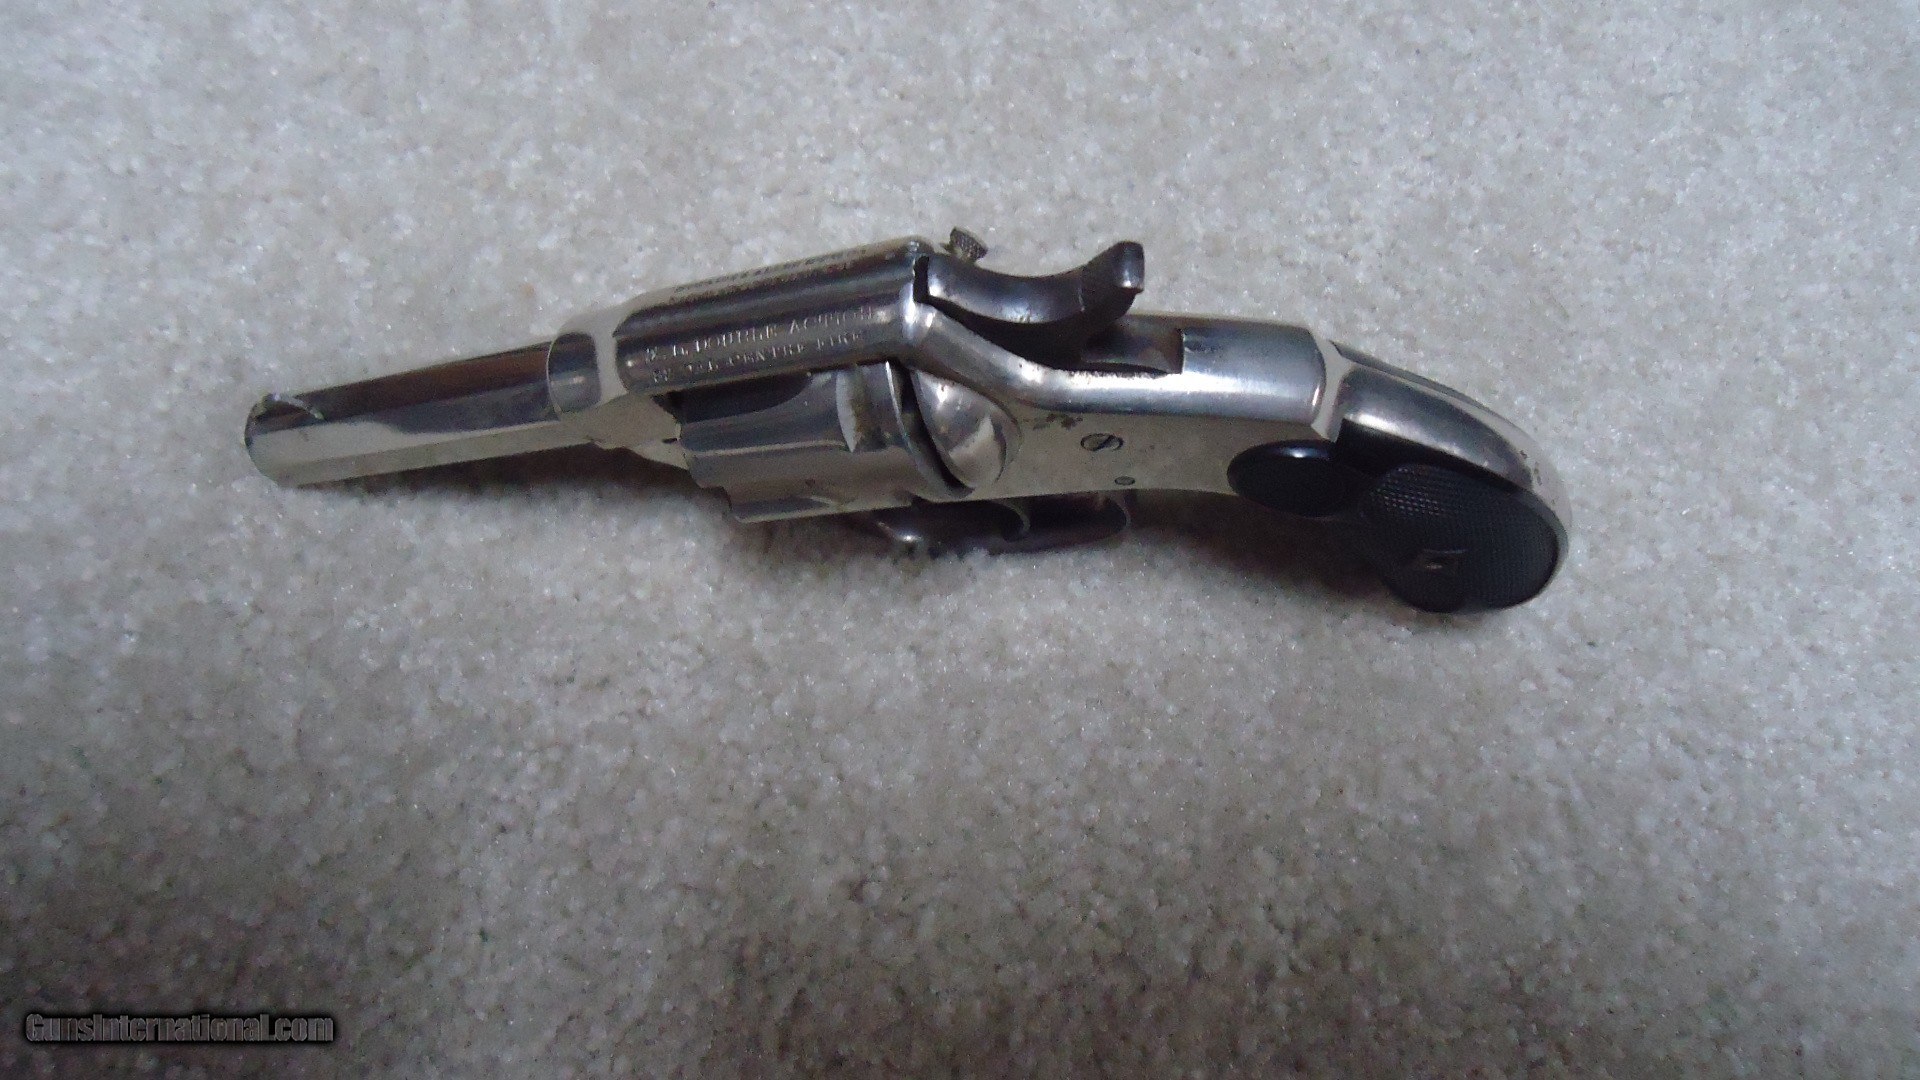 VERY FINE CONDITION HOPKINS & ALLEN X. L. DOUBLE ACTION .32 CENTER FIRE  REVOLVER, MADE BEFORE 1896.